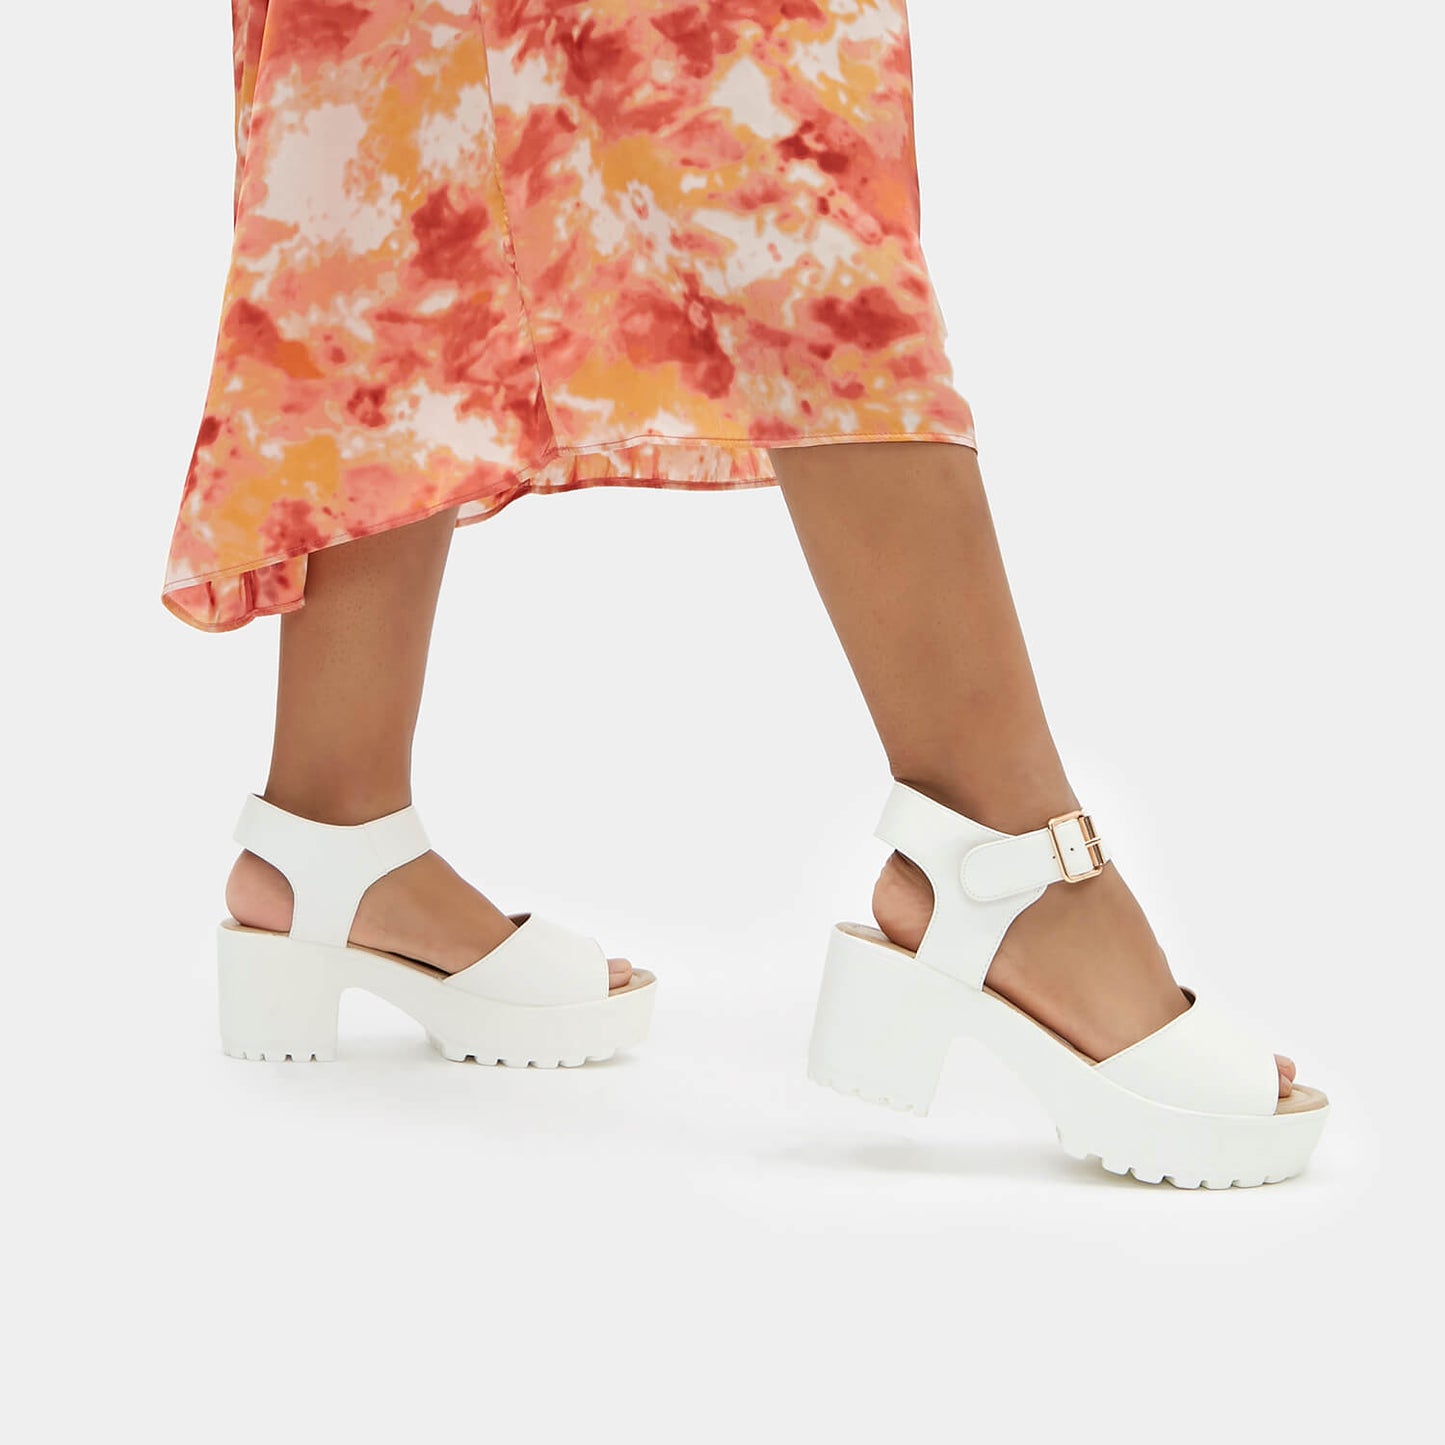 LOR White Chunky Sandals - Sandals - KOI Footwear - White - Model Right View